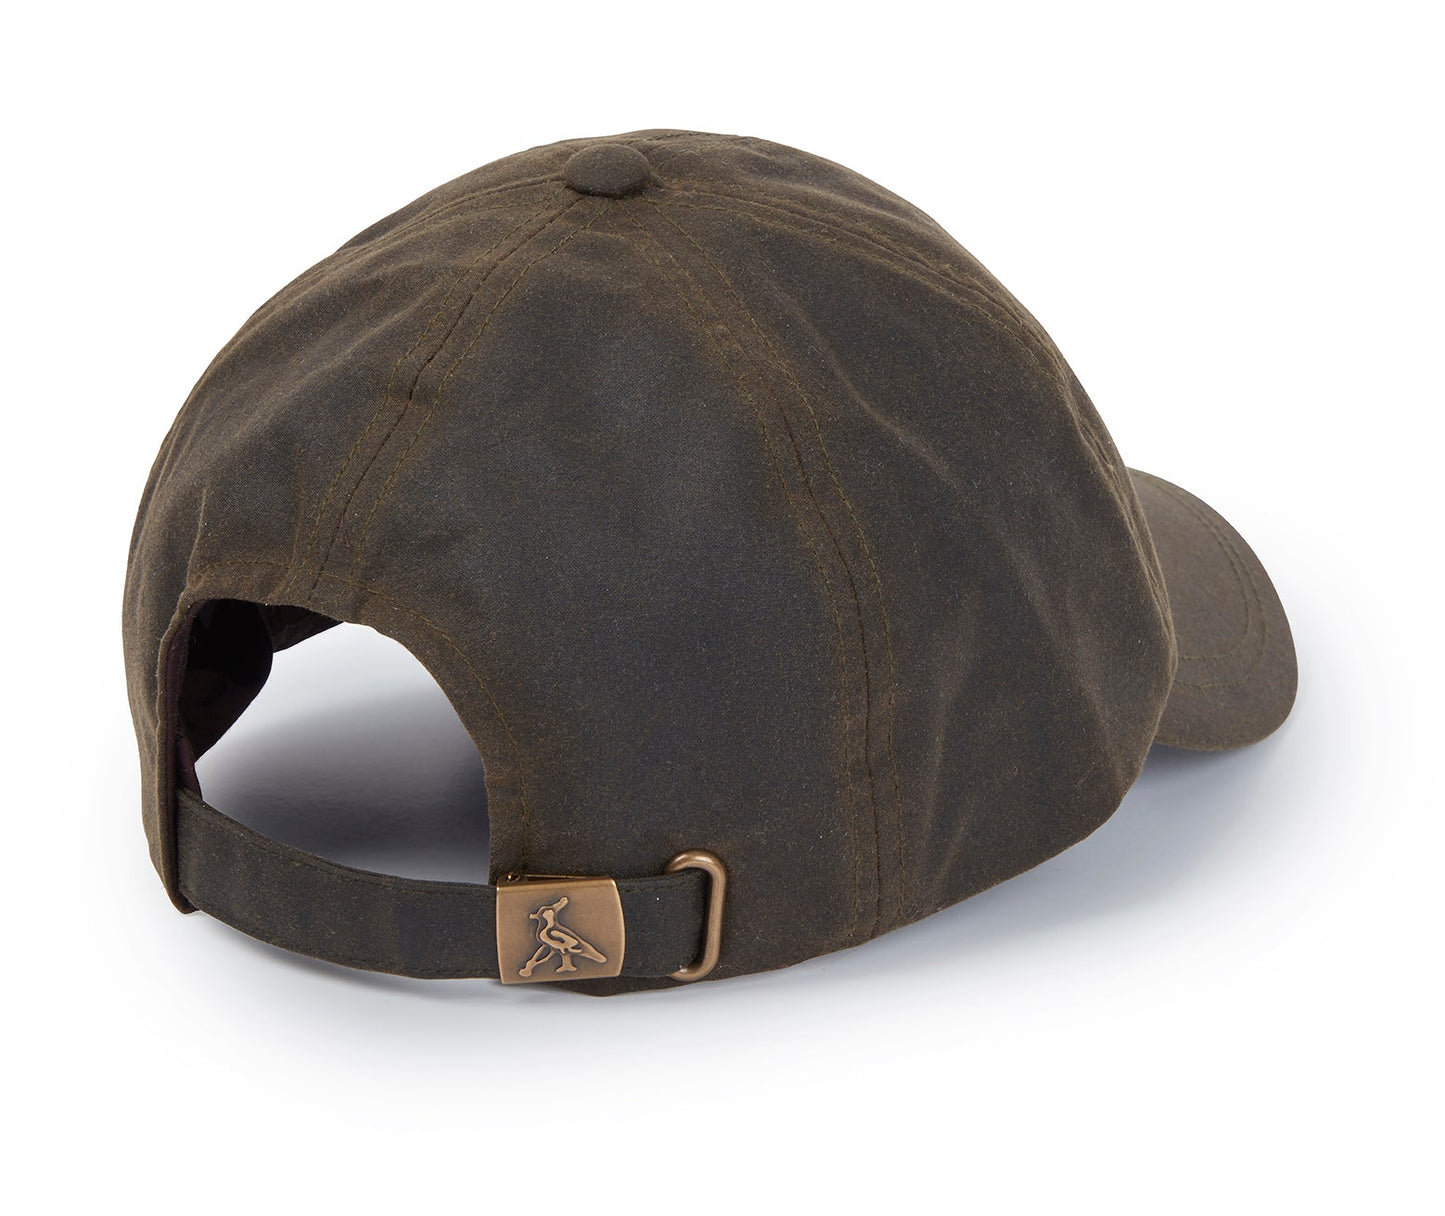 Hicks & Brown SECOND: The Wax Baseball Cap in Olive Green